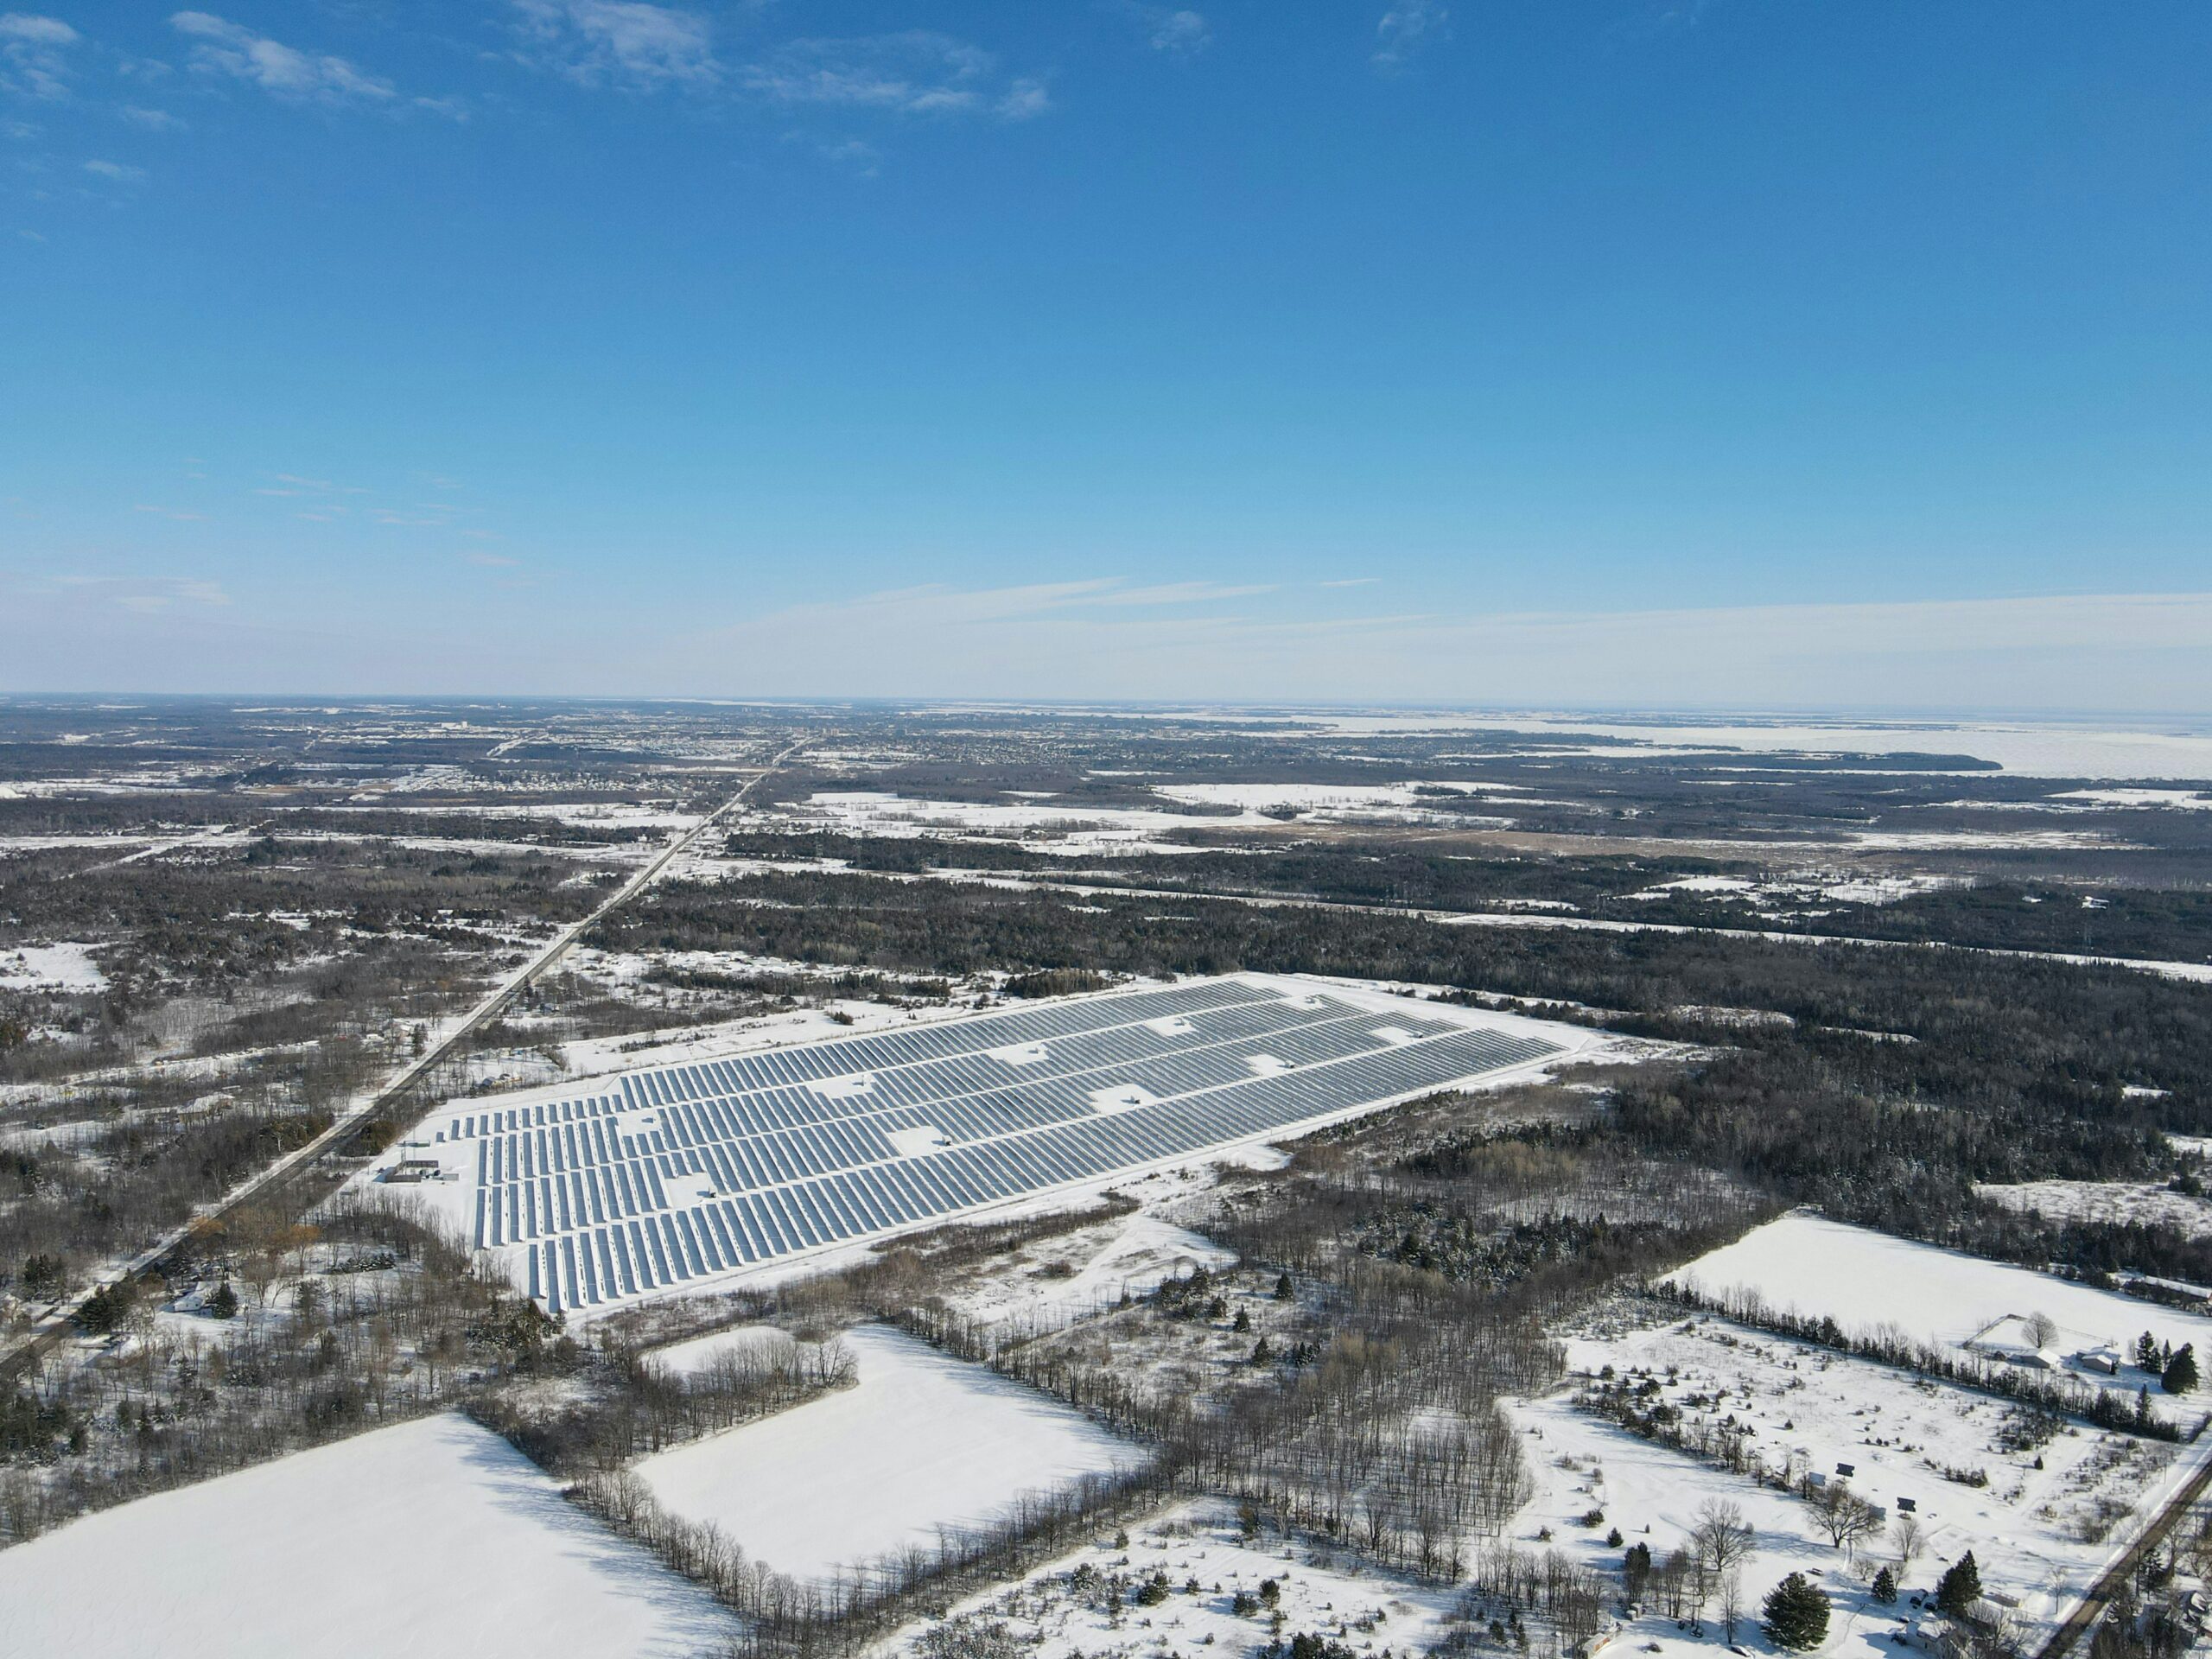 Solar Farm covered with snow showing challenging terrain.